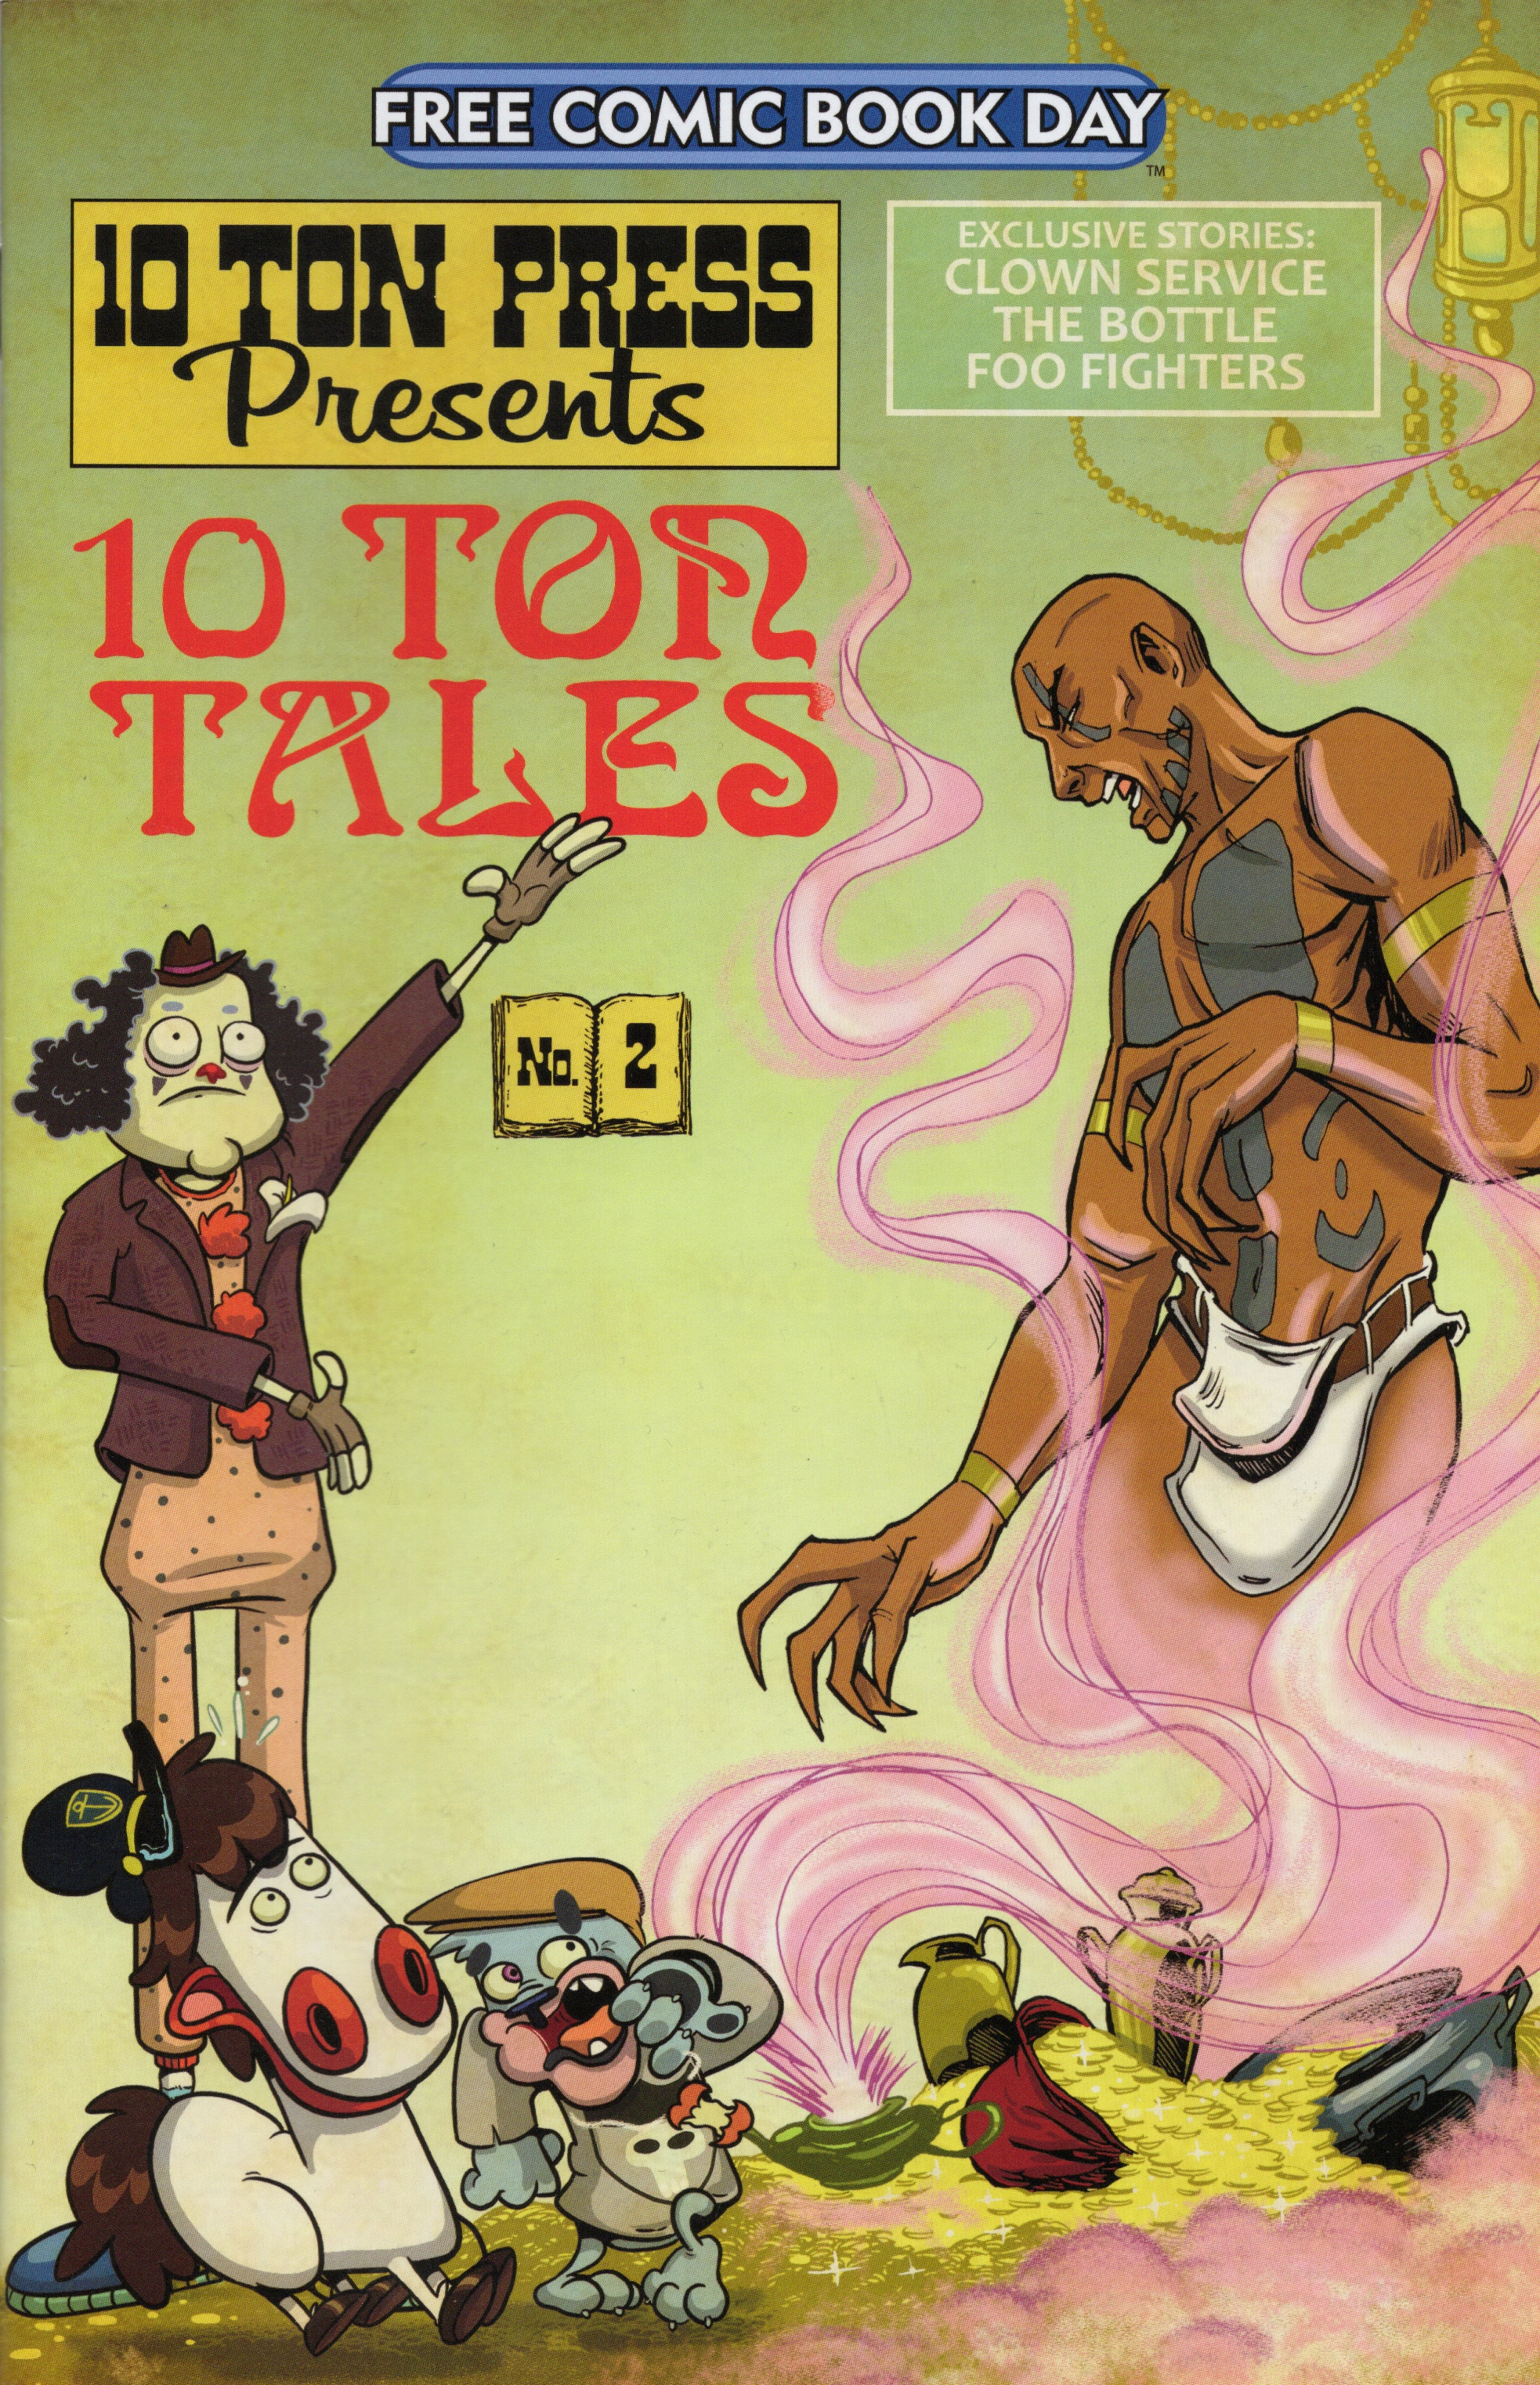 Read online Free Comic Book Day 2022 comic -  Issue # 10 Ton Press 10 Ton Tales - 1